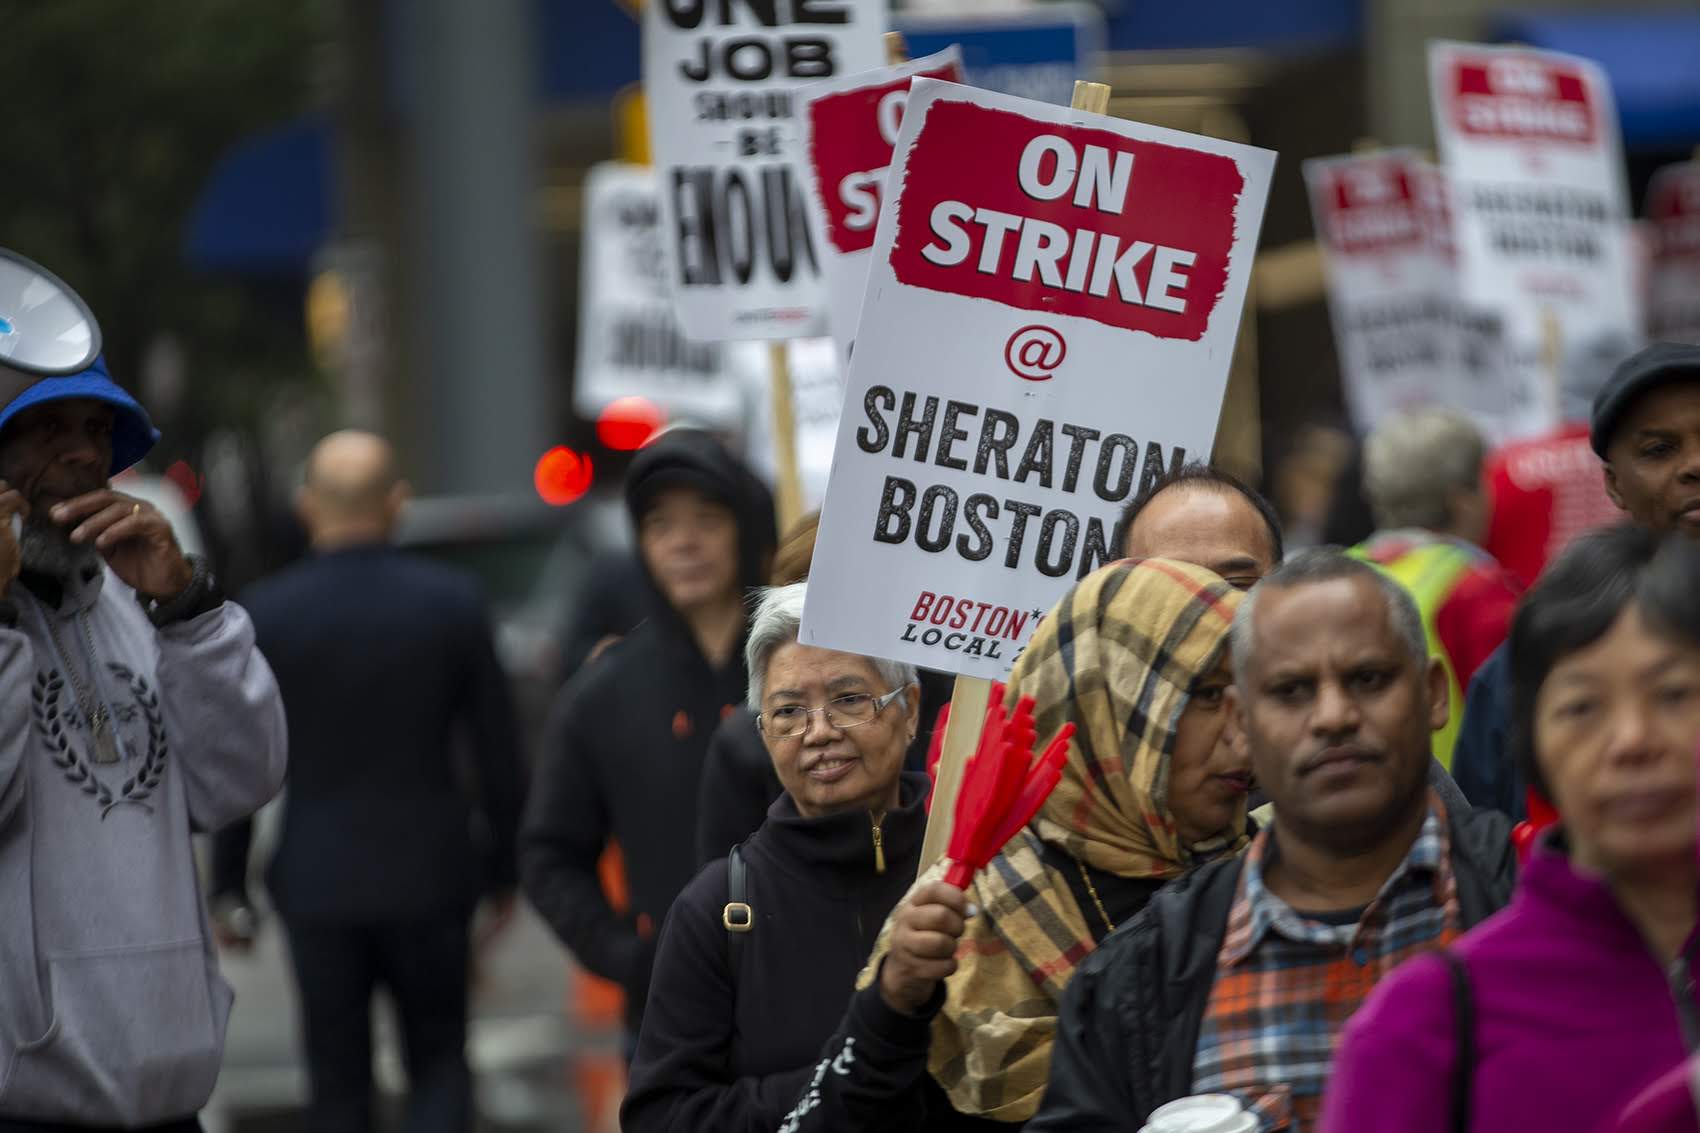 Mei Leung, left of the &quot;On Strike&quot; sign, a housekeeper at the Sheraton Boston, has been picketing regularly in front of the hotel. (Jesse Costa/WBUR)